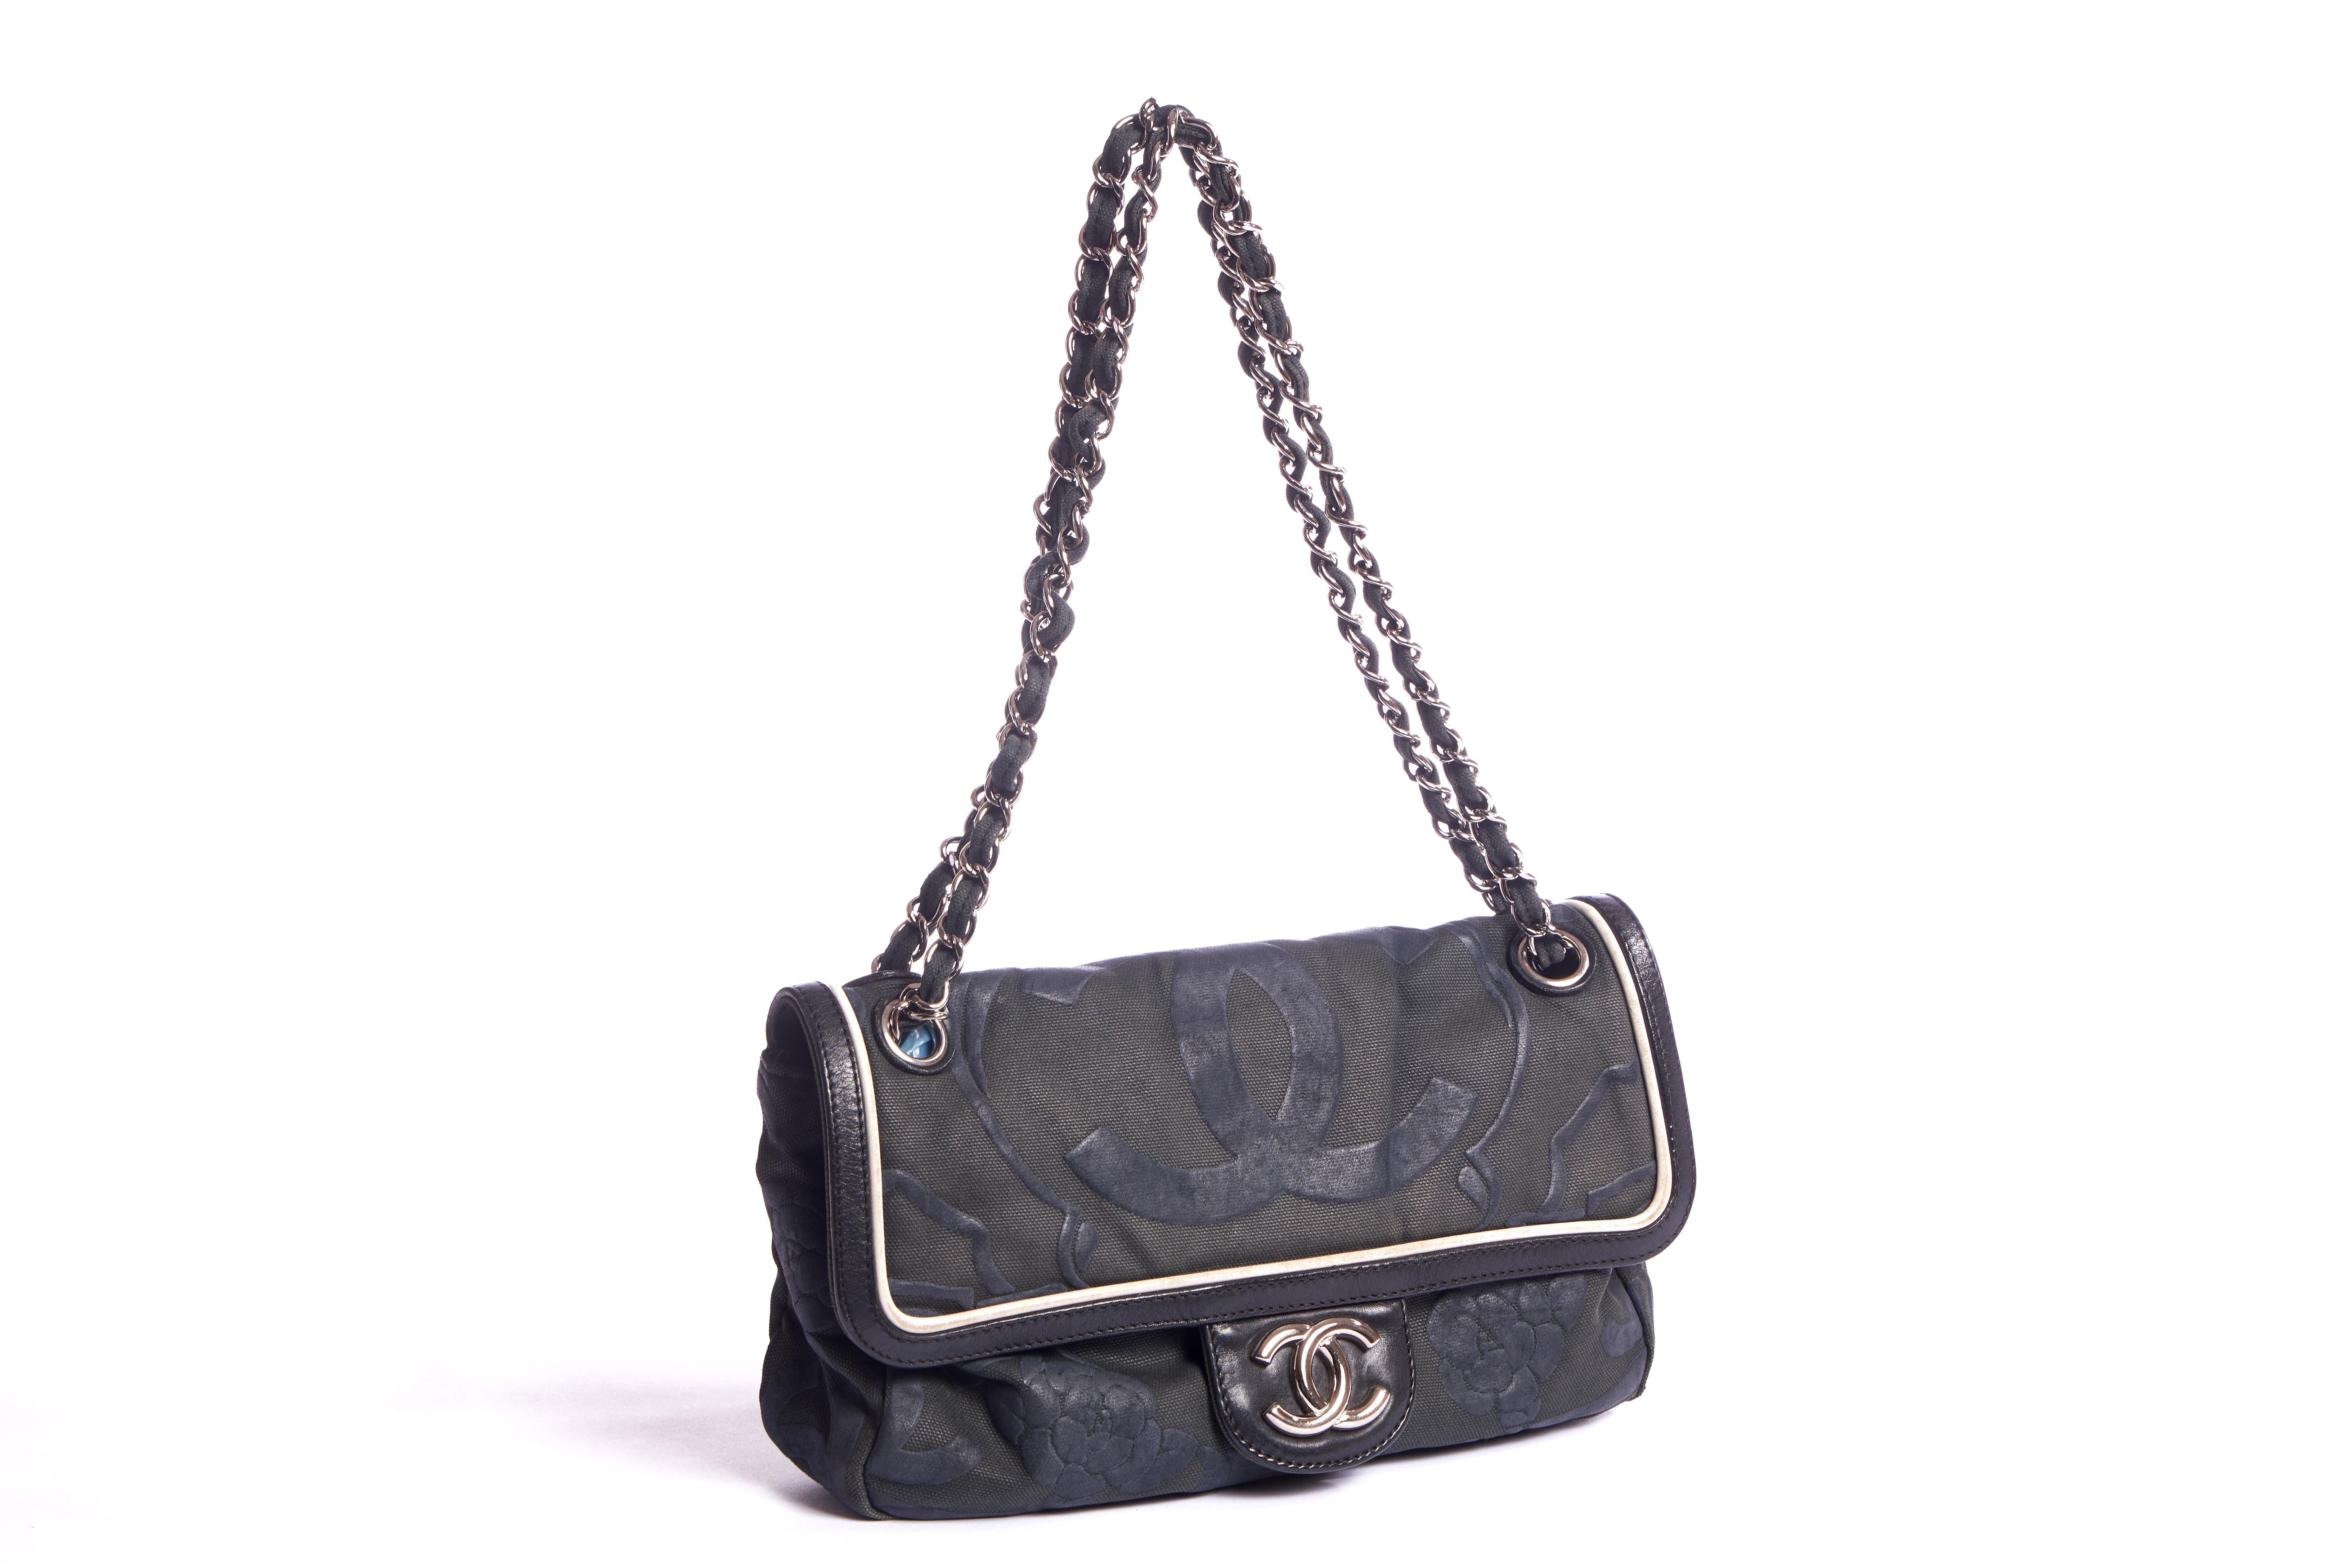 Chanel olive green single flap with black silicon design. Shoulder drop 9.25